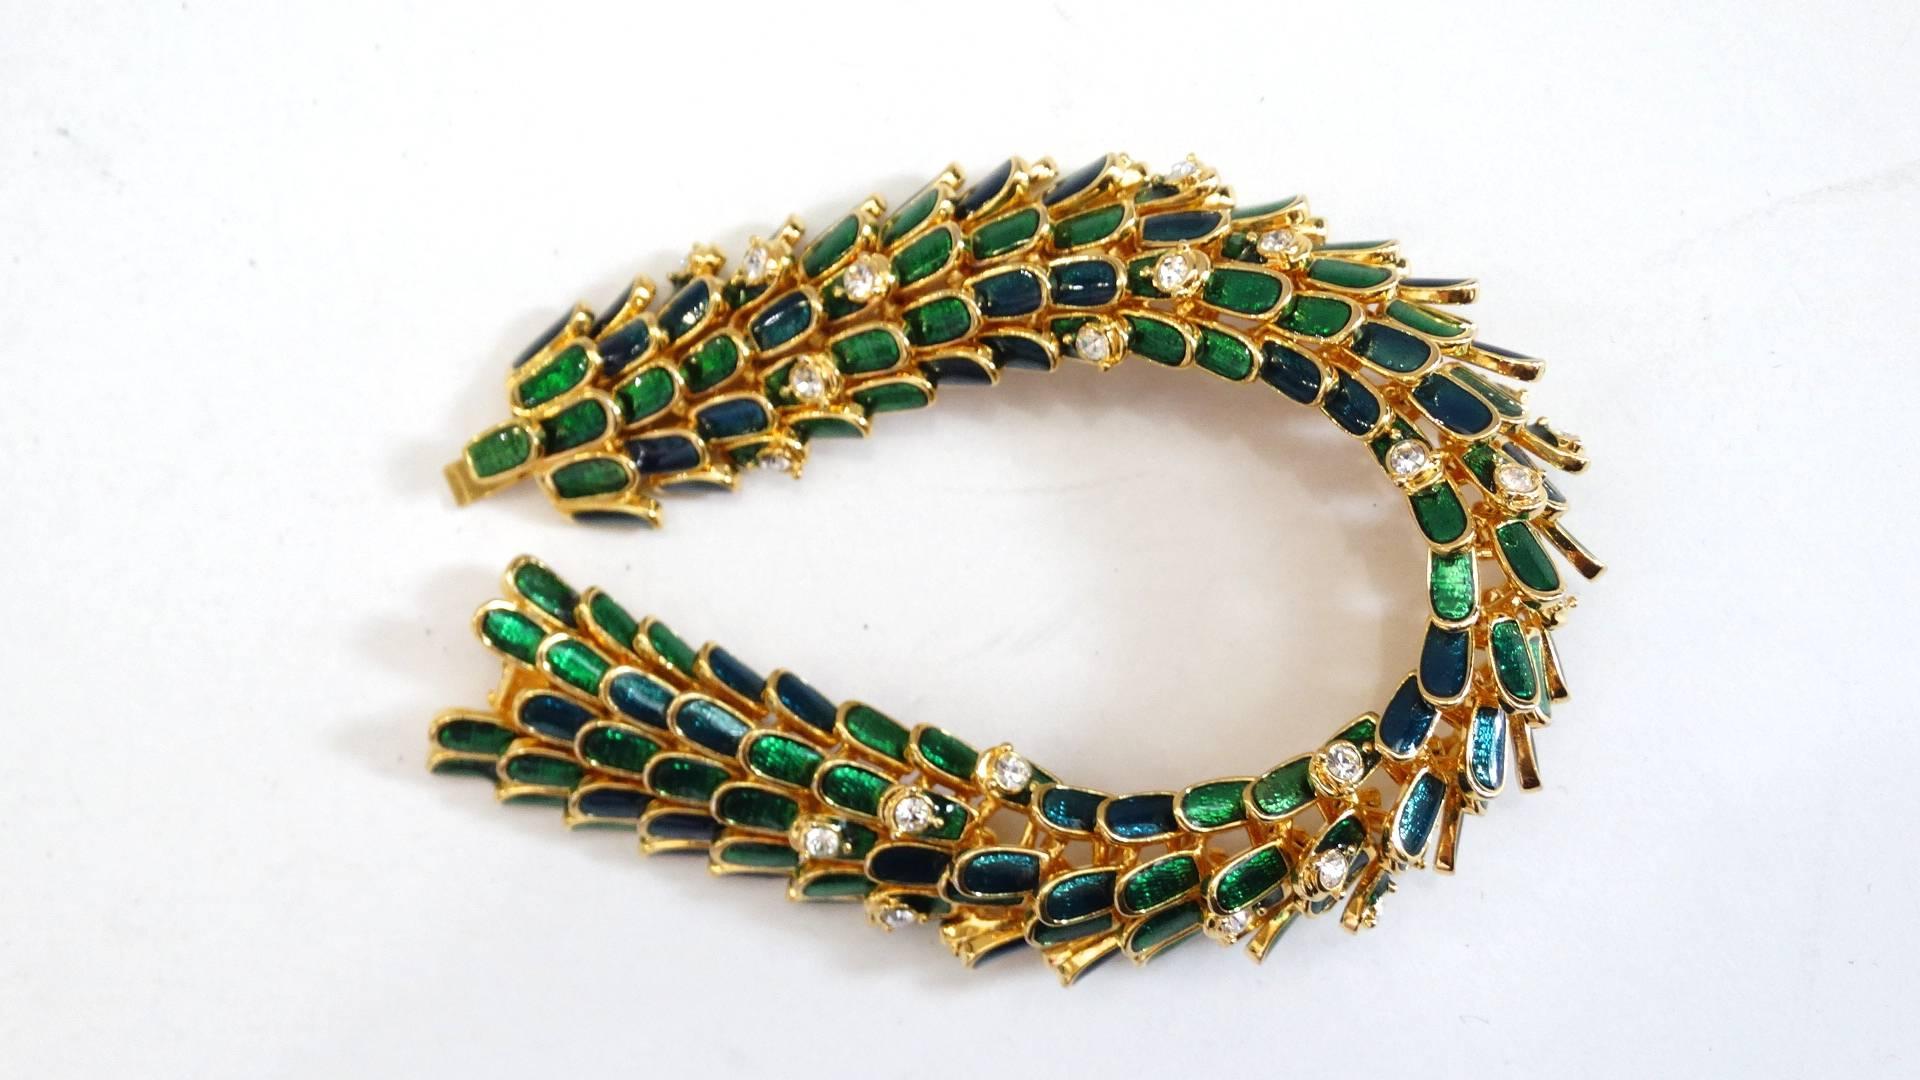 Channel your inner fierceness with our KJL by Kenneth Jay Lane enamel dragon scale bracelet! Made of a brilliant and shiny gold metal, with contrasting jewel beetle green enamel on each of the 